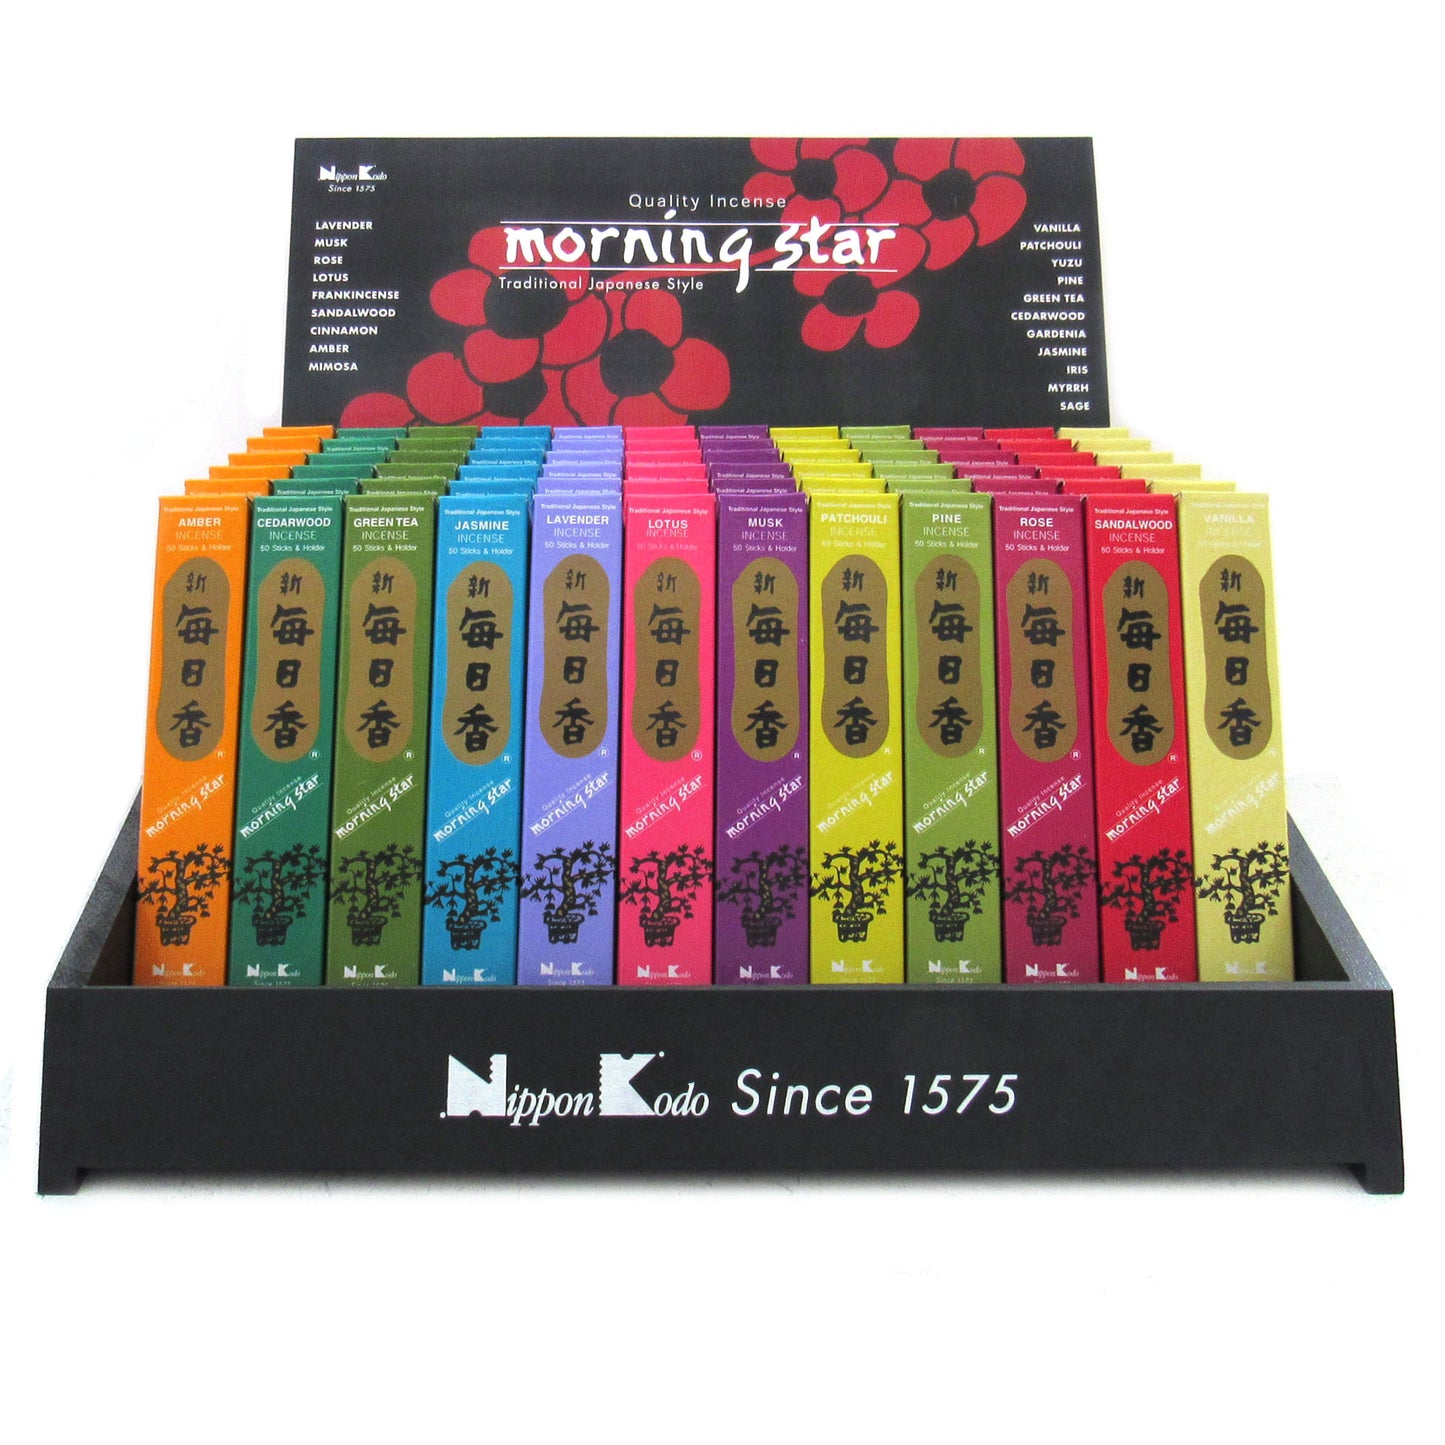 Morning Star Incense - Amber (Box of 50 Sticks with Holder)